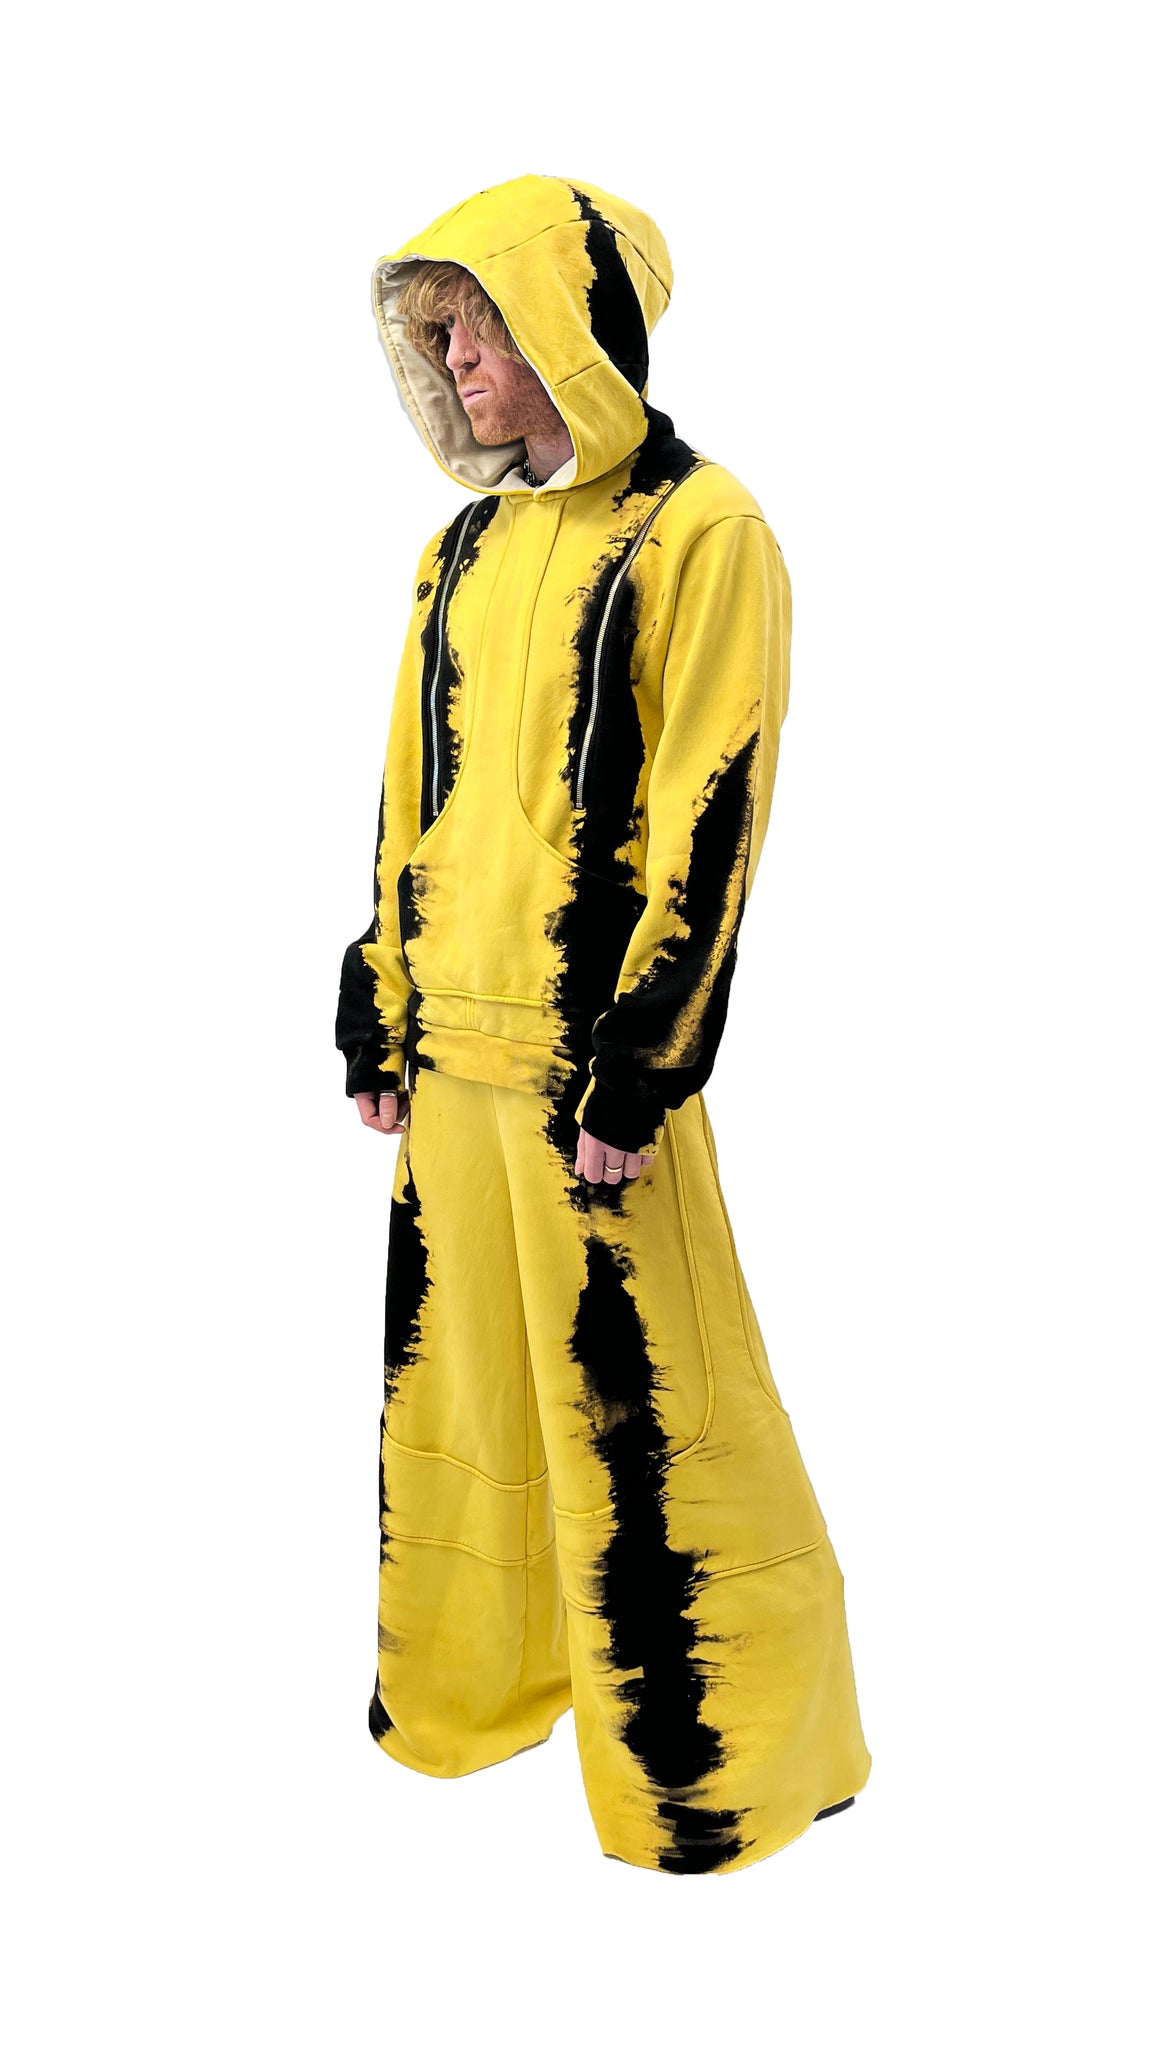 DIVIDER HOODIE - TOXIC YELLOW